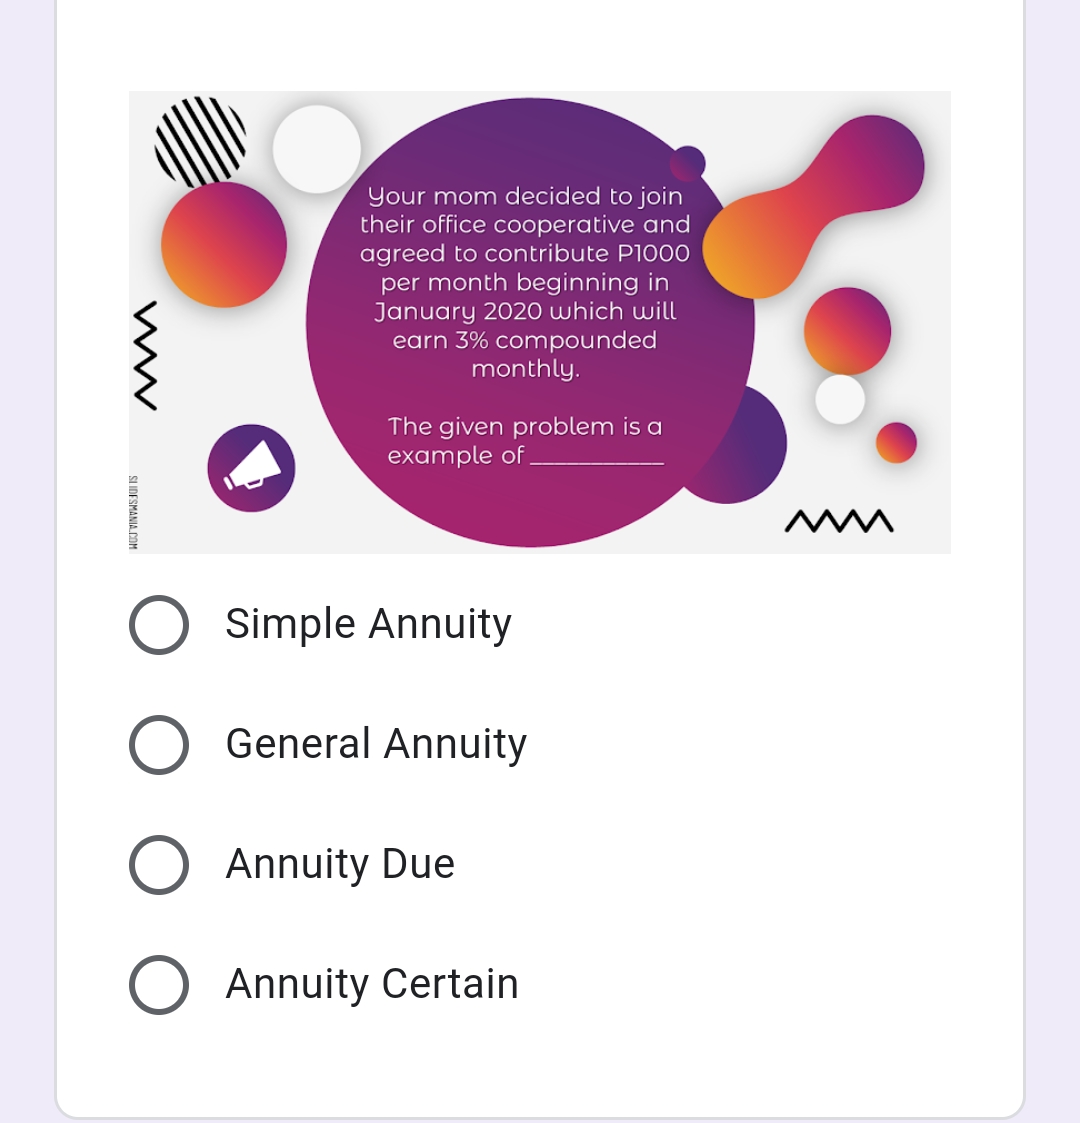 Your mom decided to join
their office cooperative and
agreed to contribute P1000
per month beginning in
January 2020 which will
earn 3% compounded
monthly.
The given problem is a
example of
Simple Annuity
General Annuity
Annuity Due
Annuity Certain
SLIDESMANIA.COM
